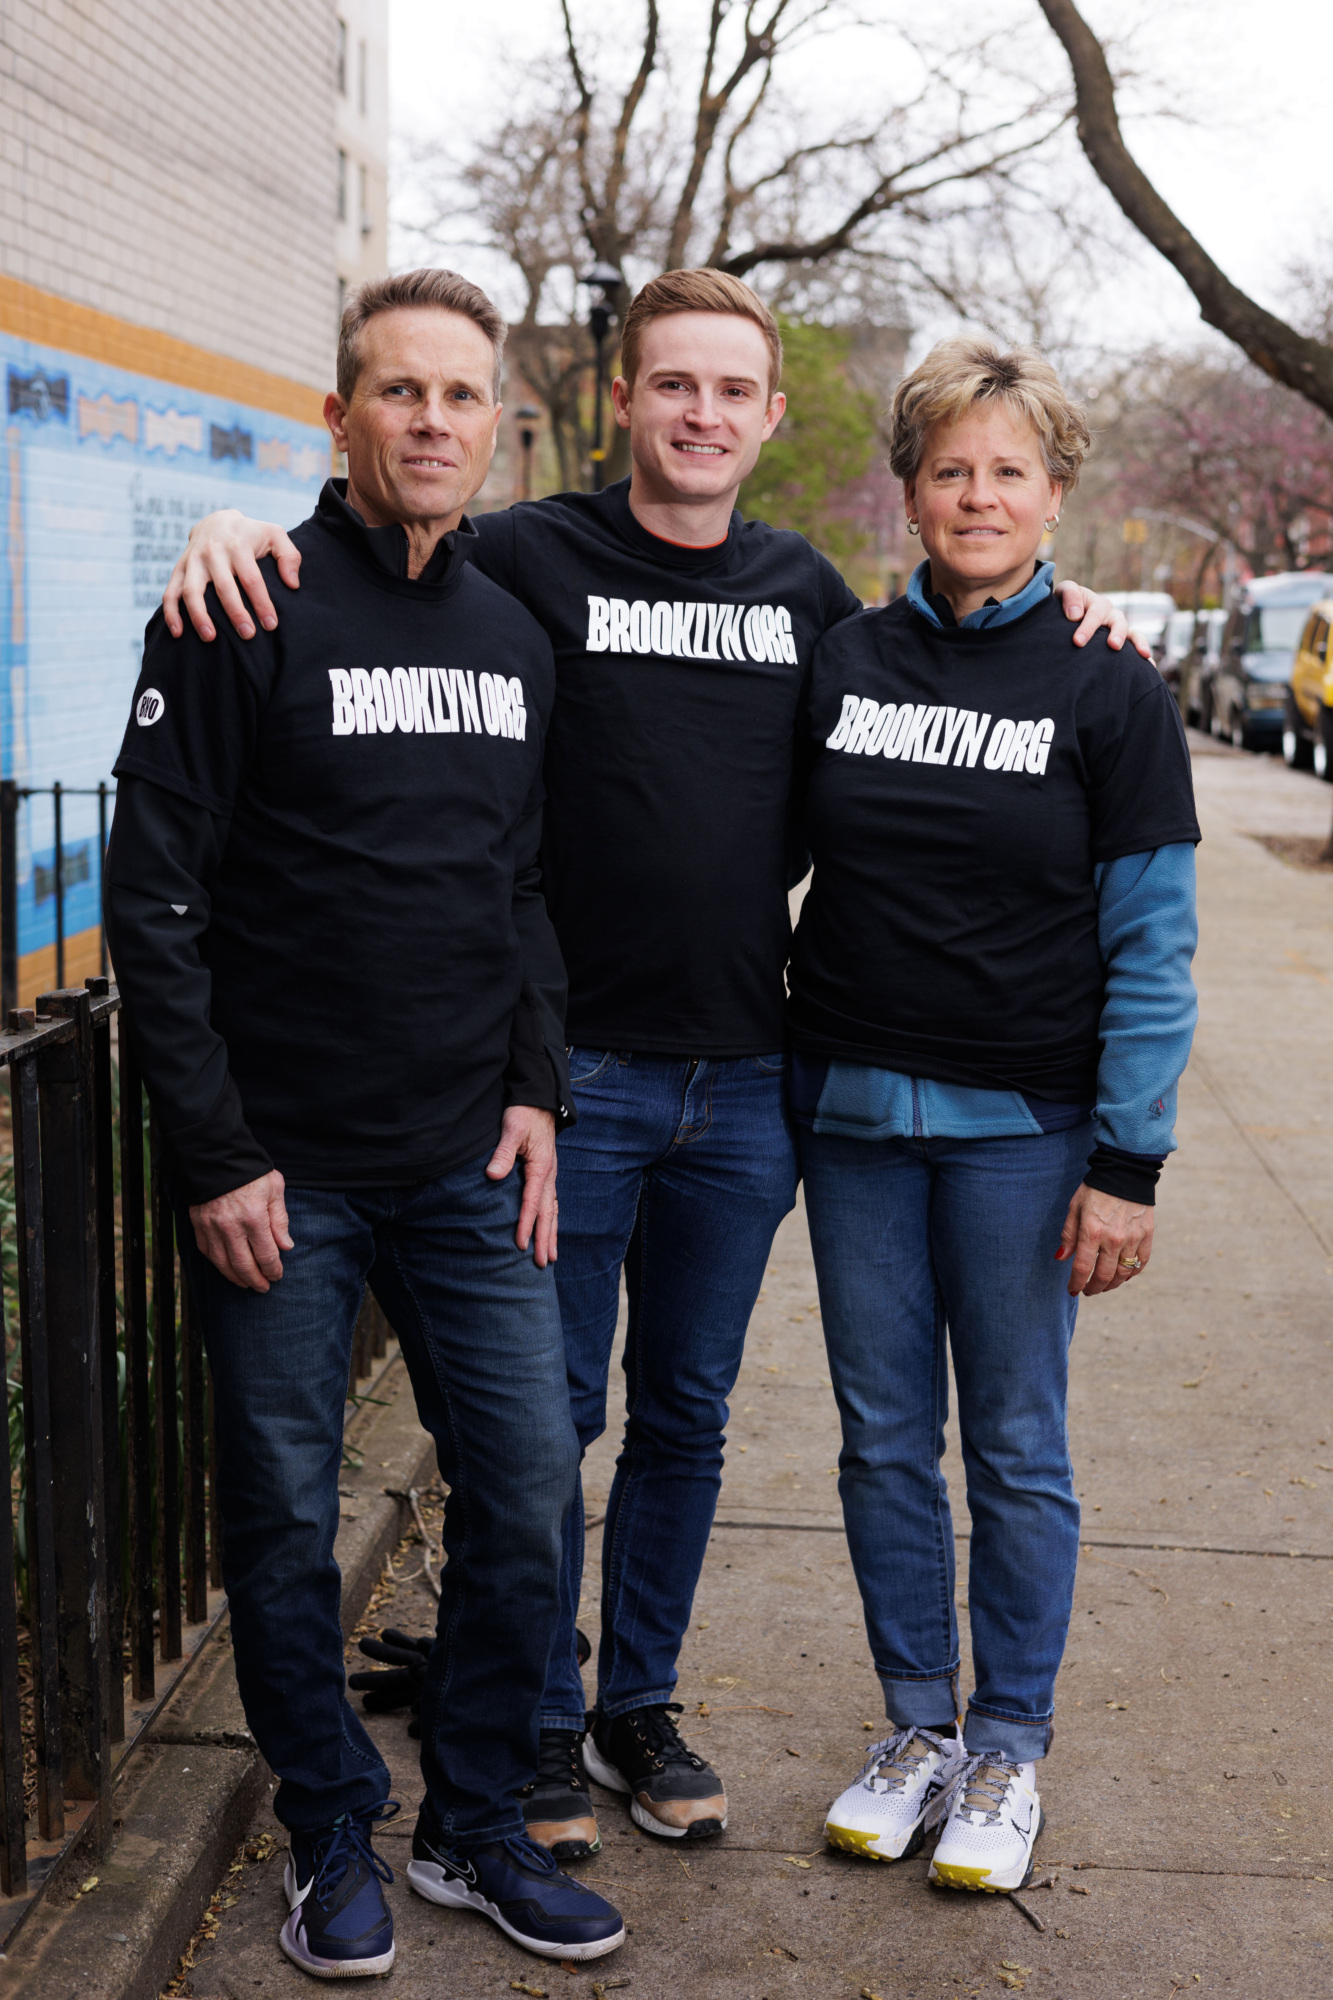 Three people standing on a sidewalk, wearing black "brooklyn" hoodies and jeans, smiling at the camera.